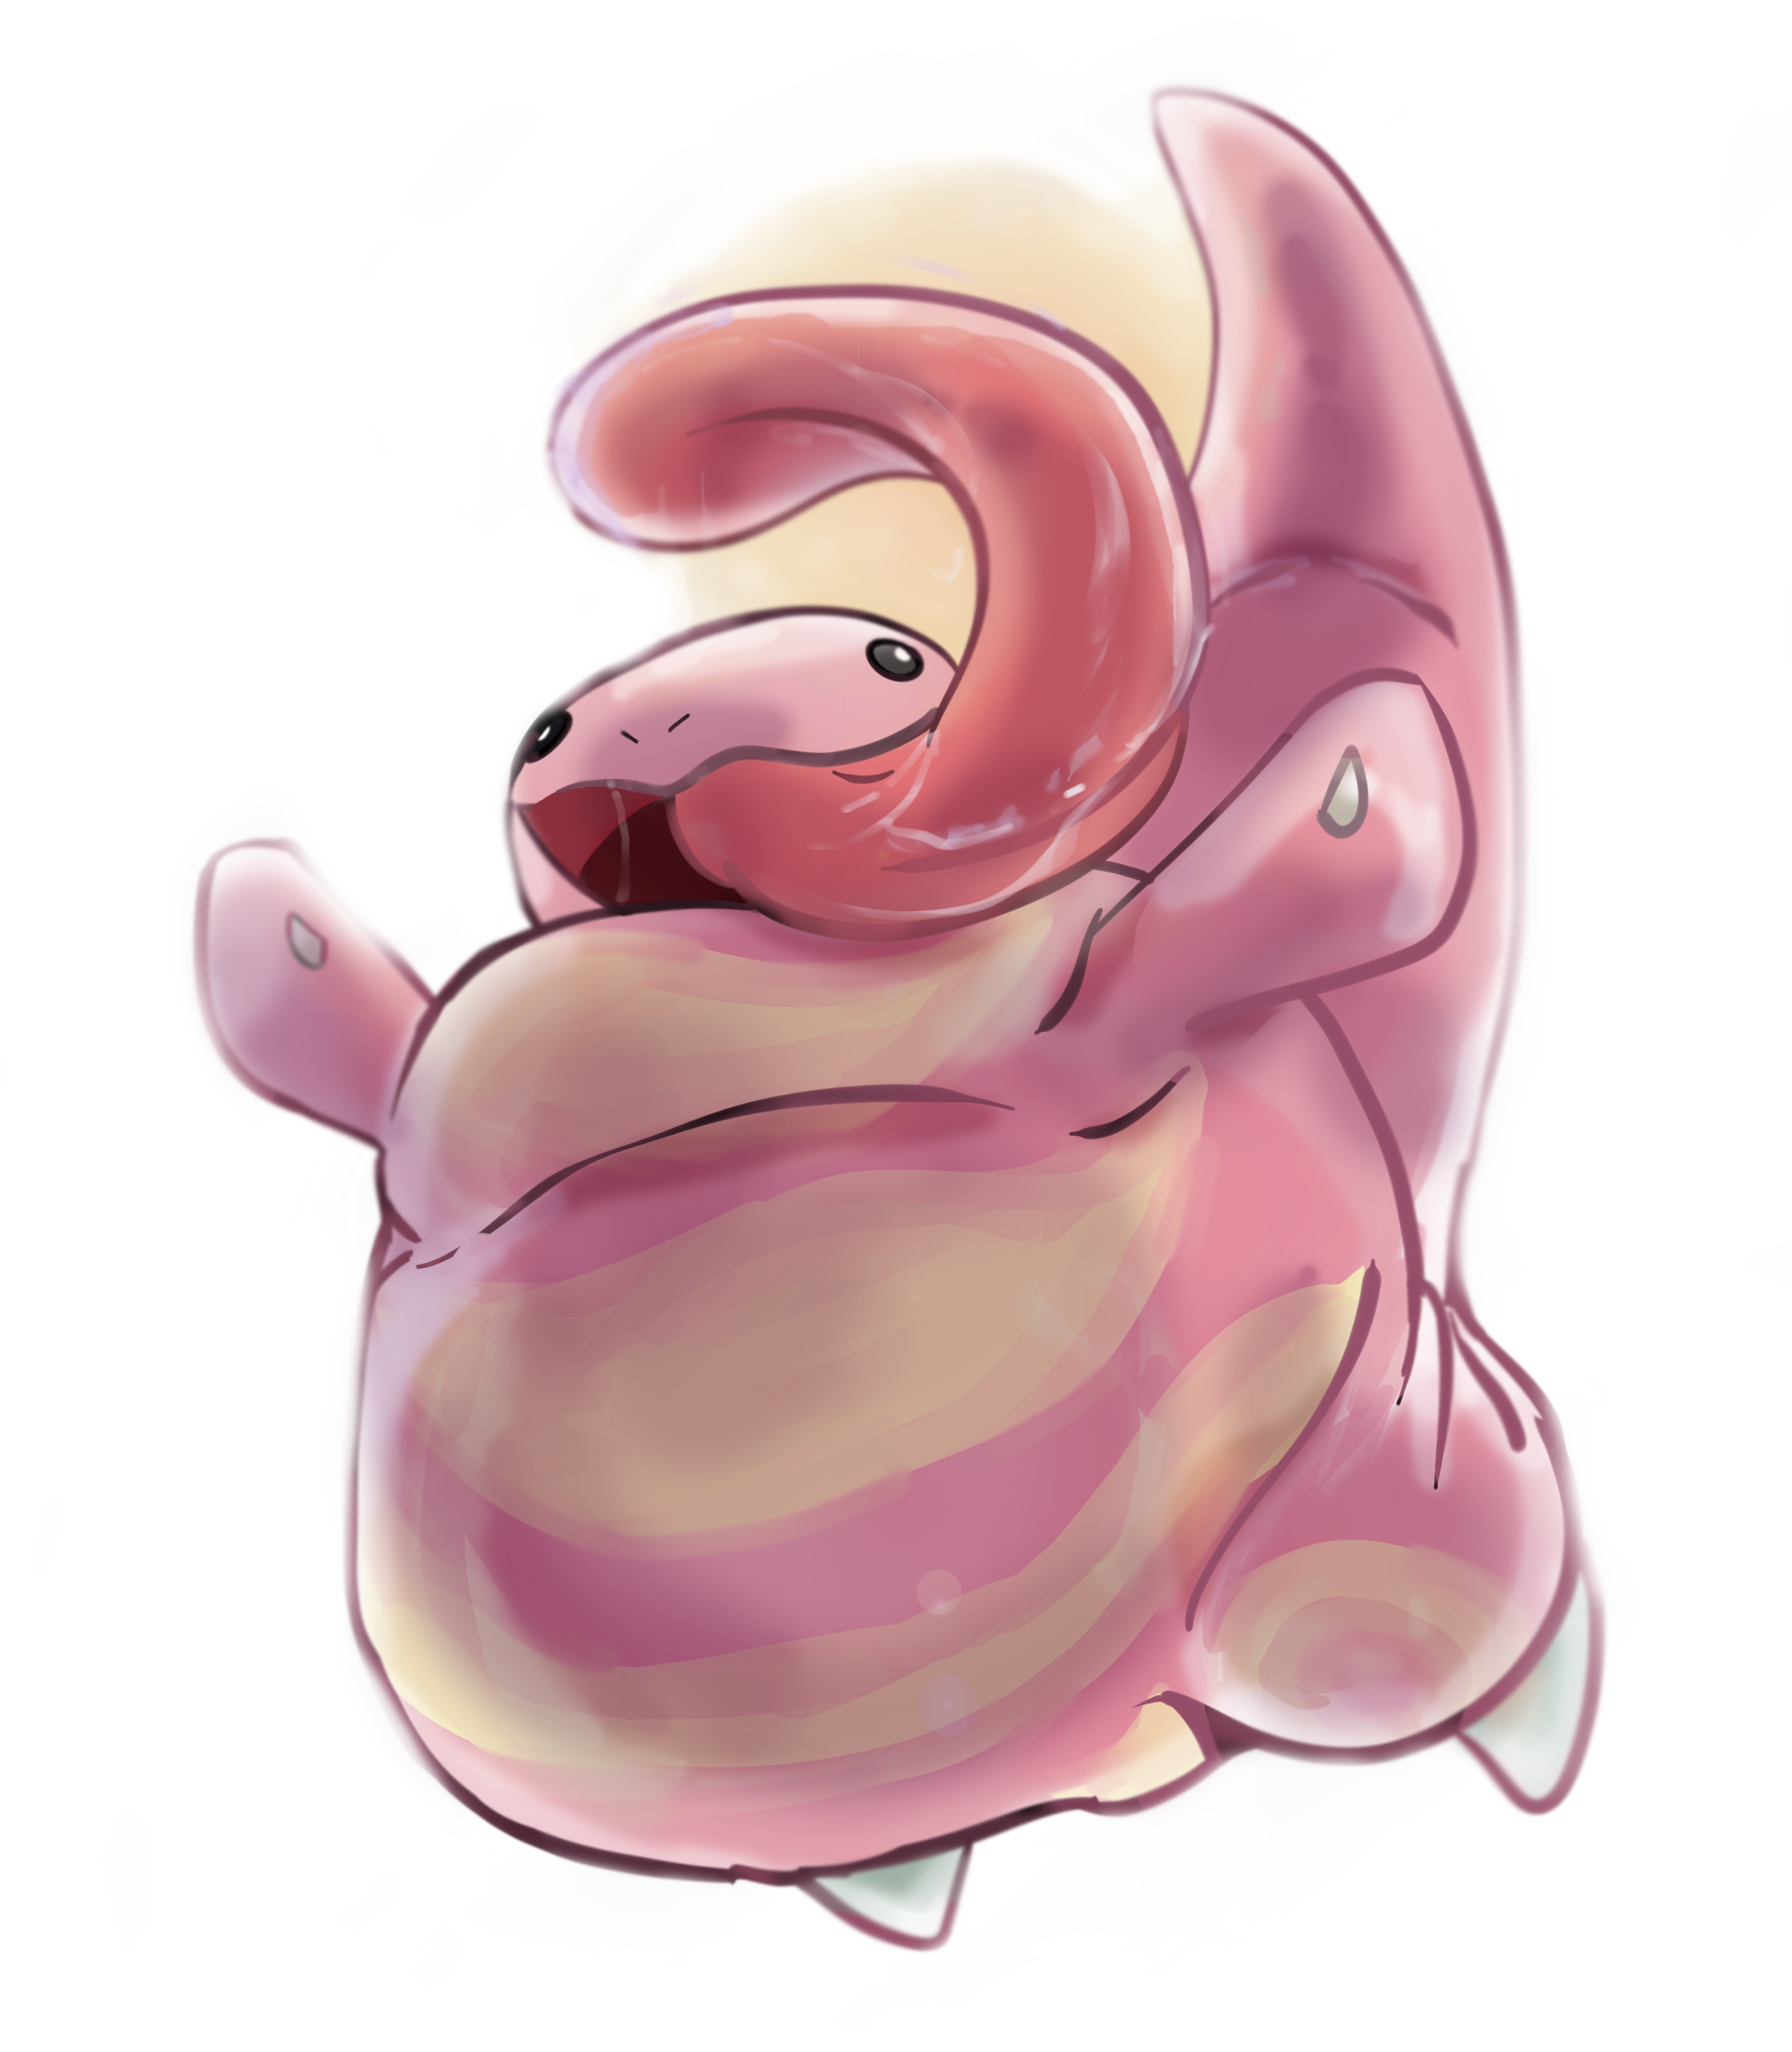 lickitung-used-body-slam-by-thefredricus